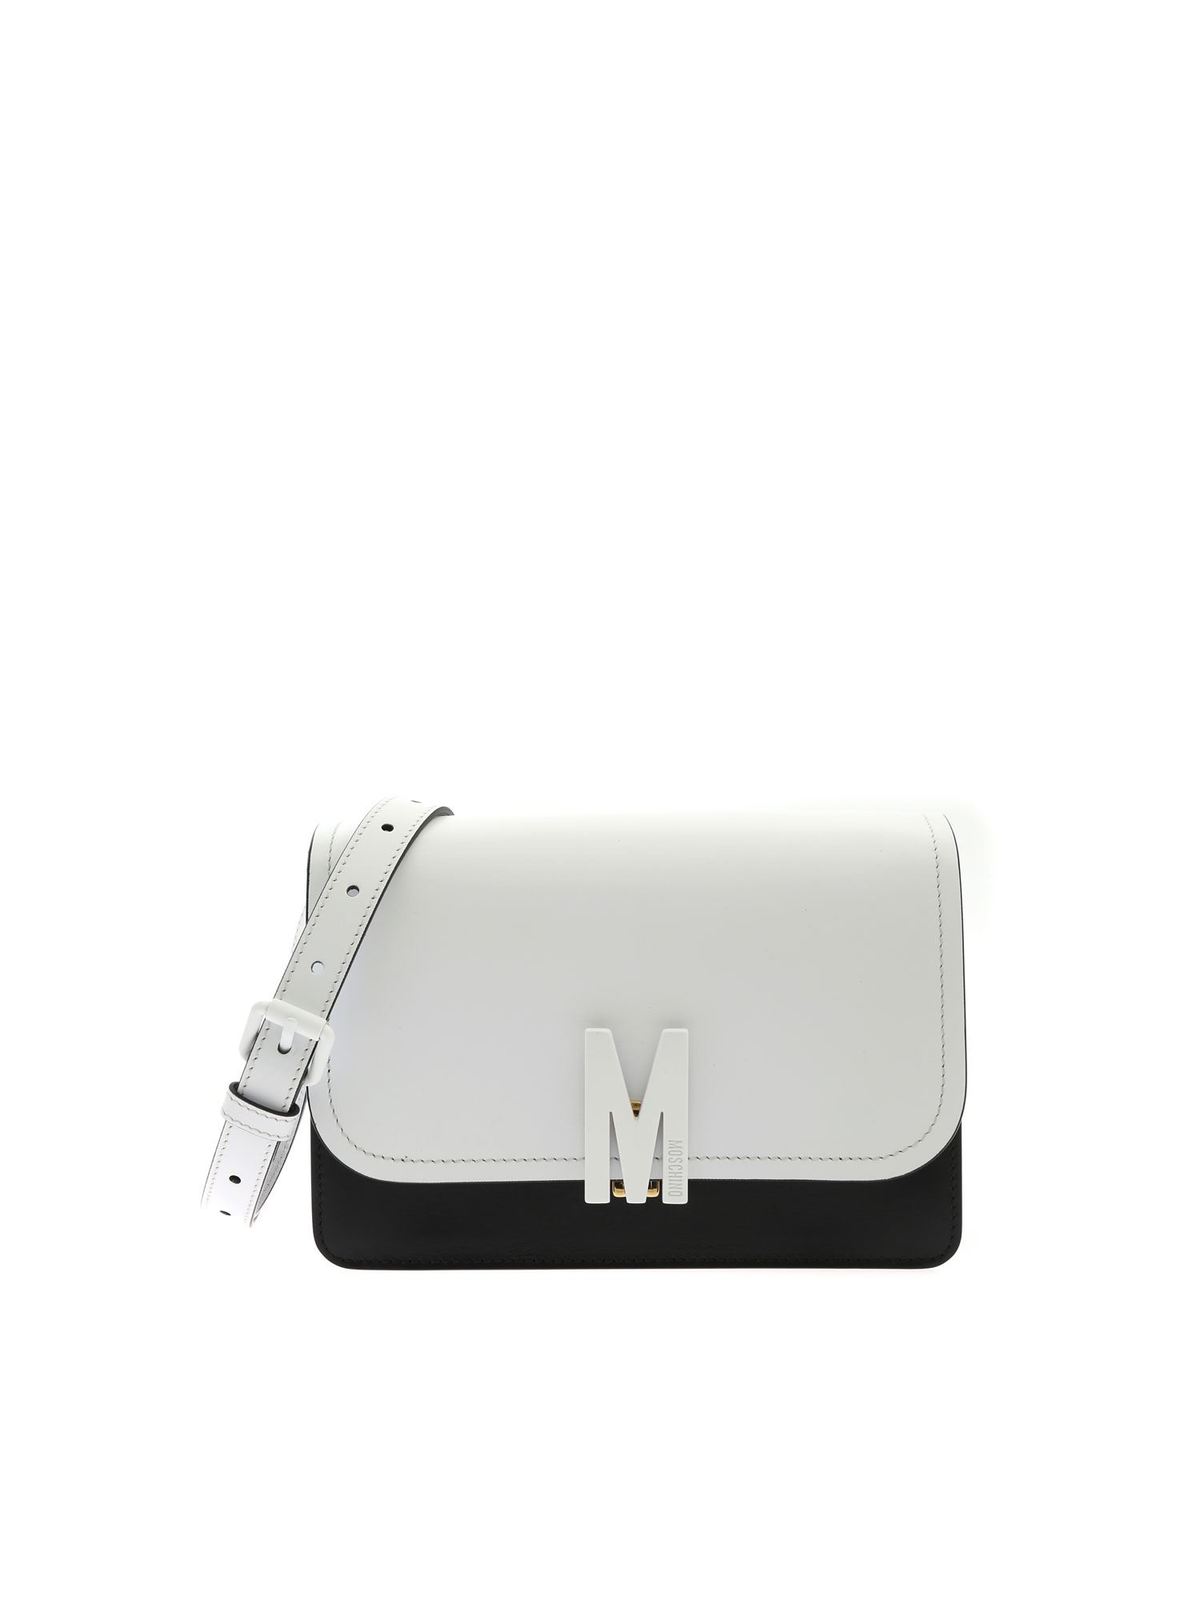 MOSCHINO M BICOLOR SHOULDER BAG IN WHITE AND BLACK